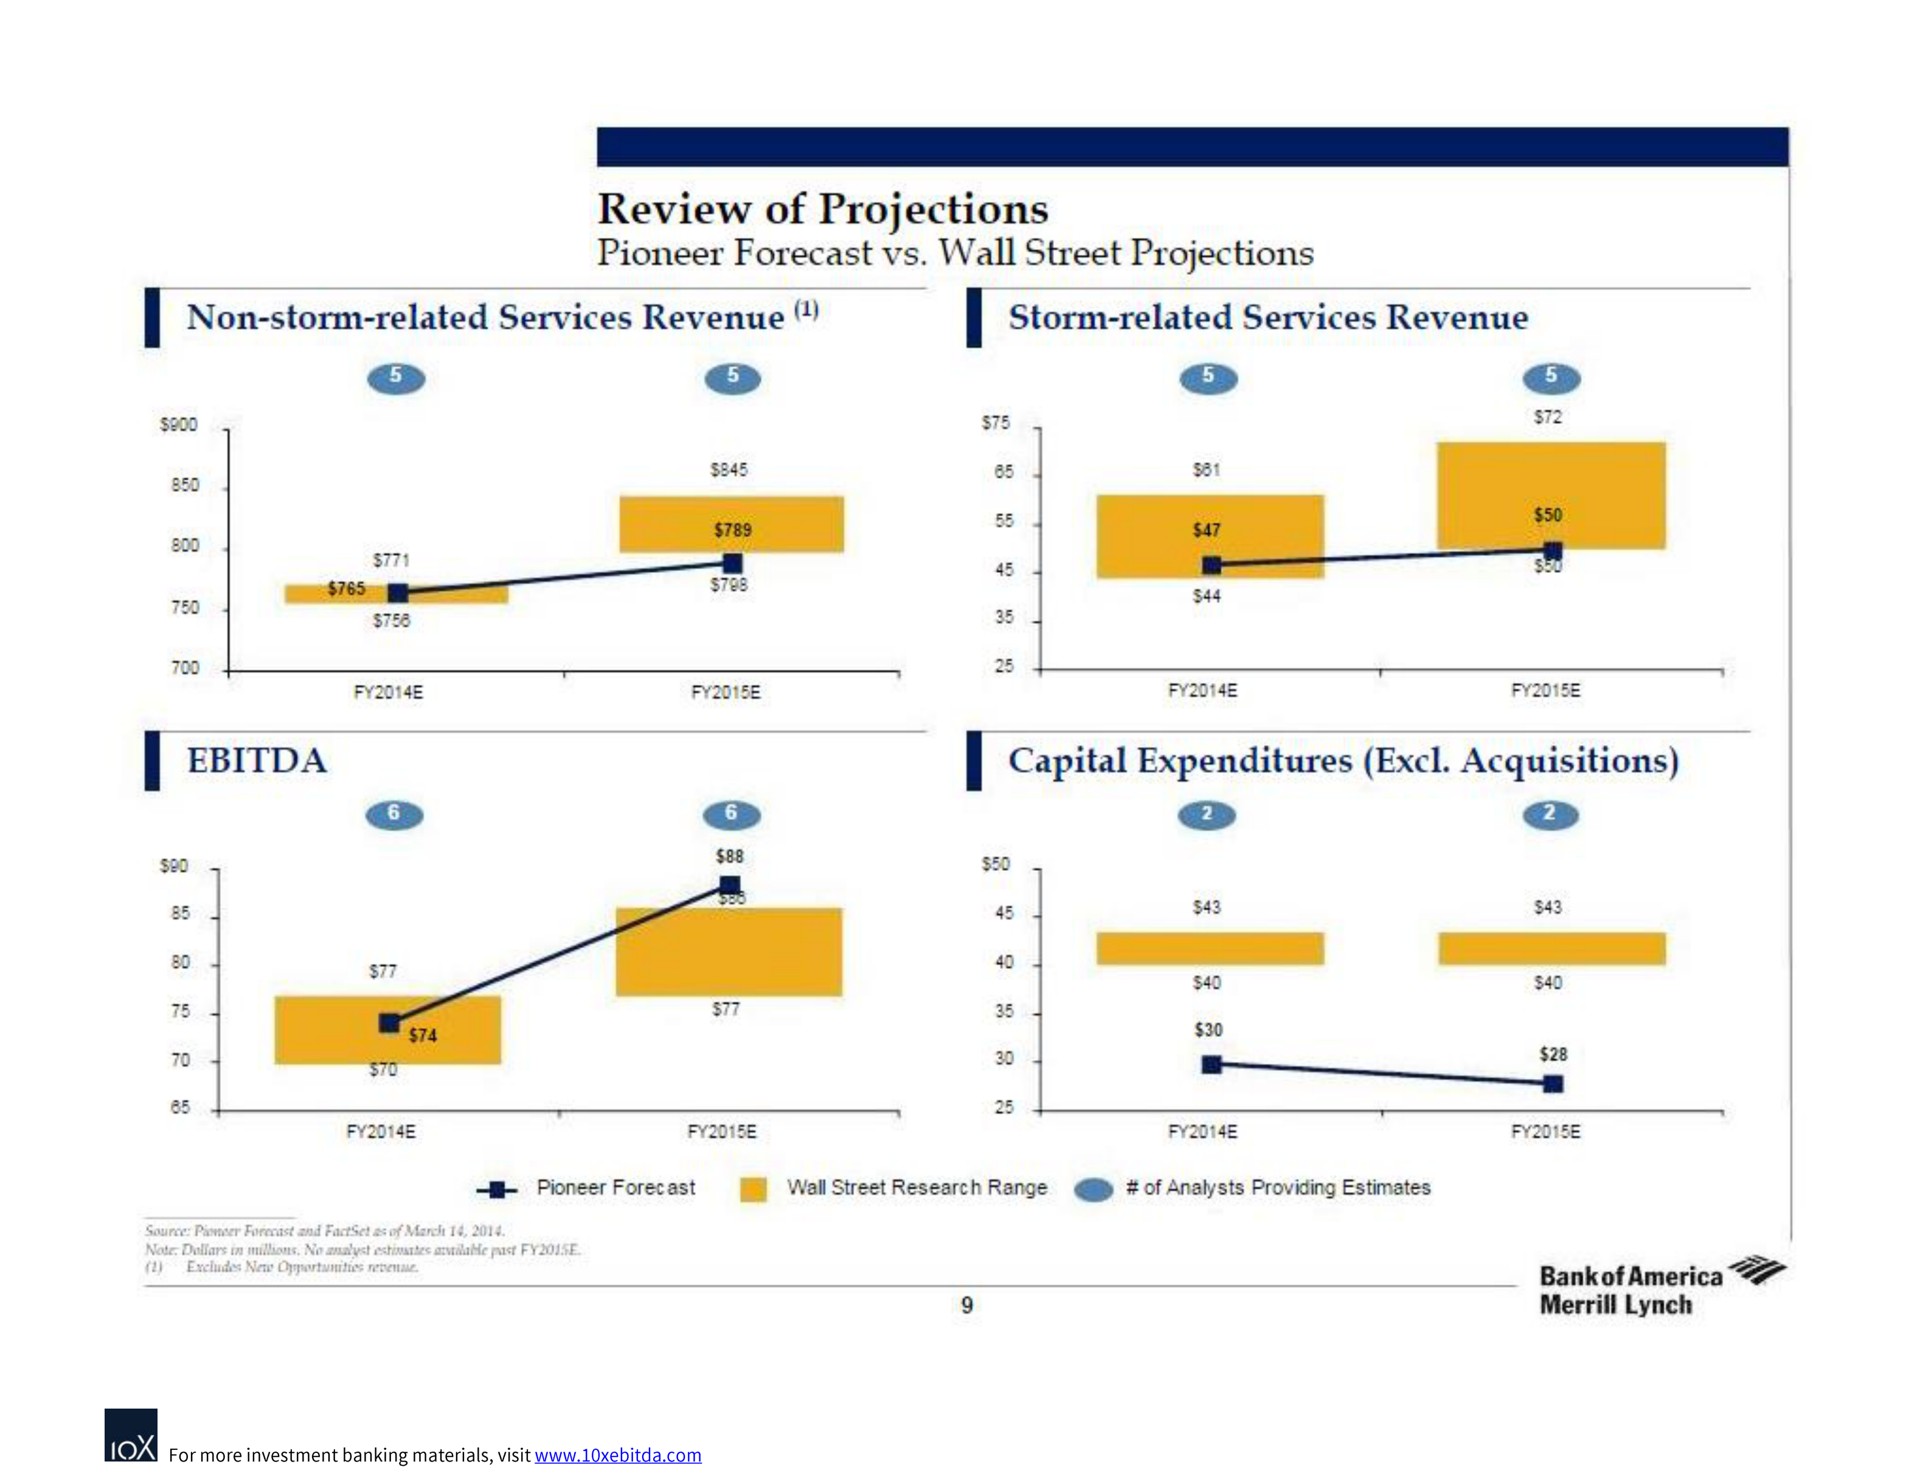 review of projections pioneer forecast wall street projections | Bank of America